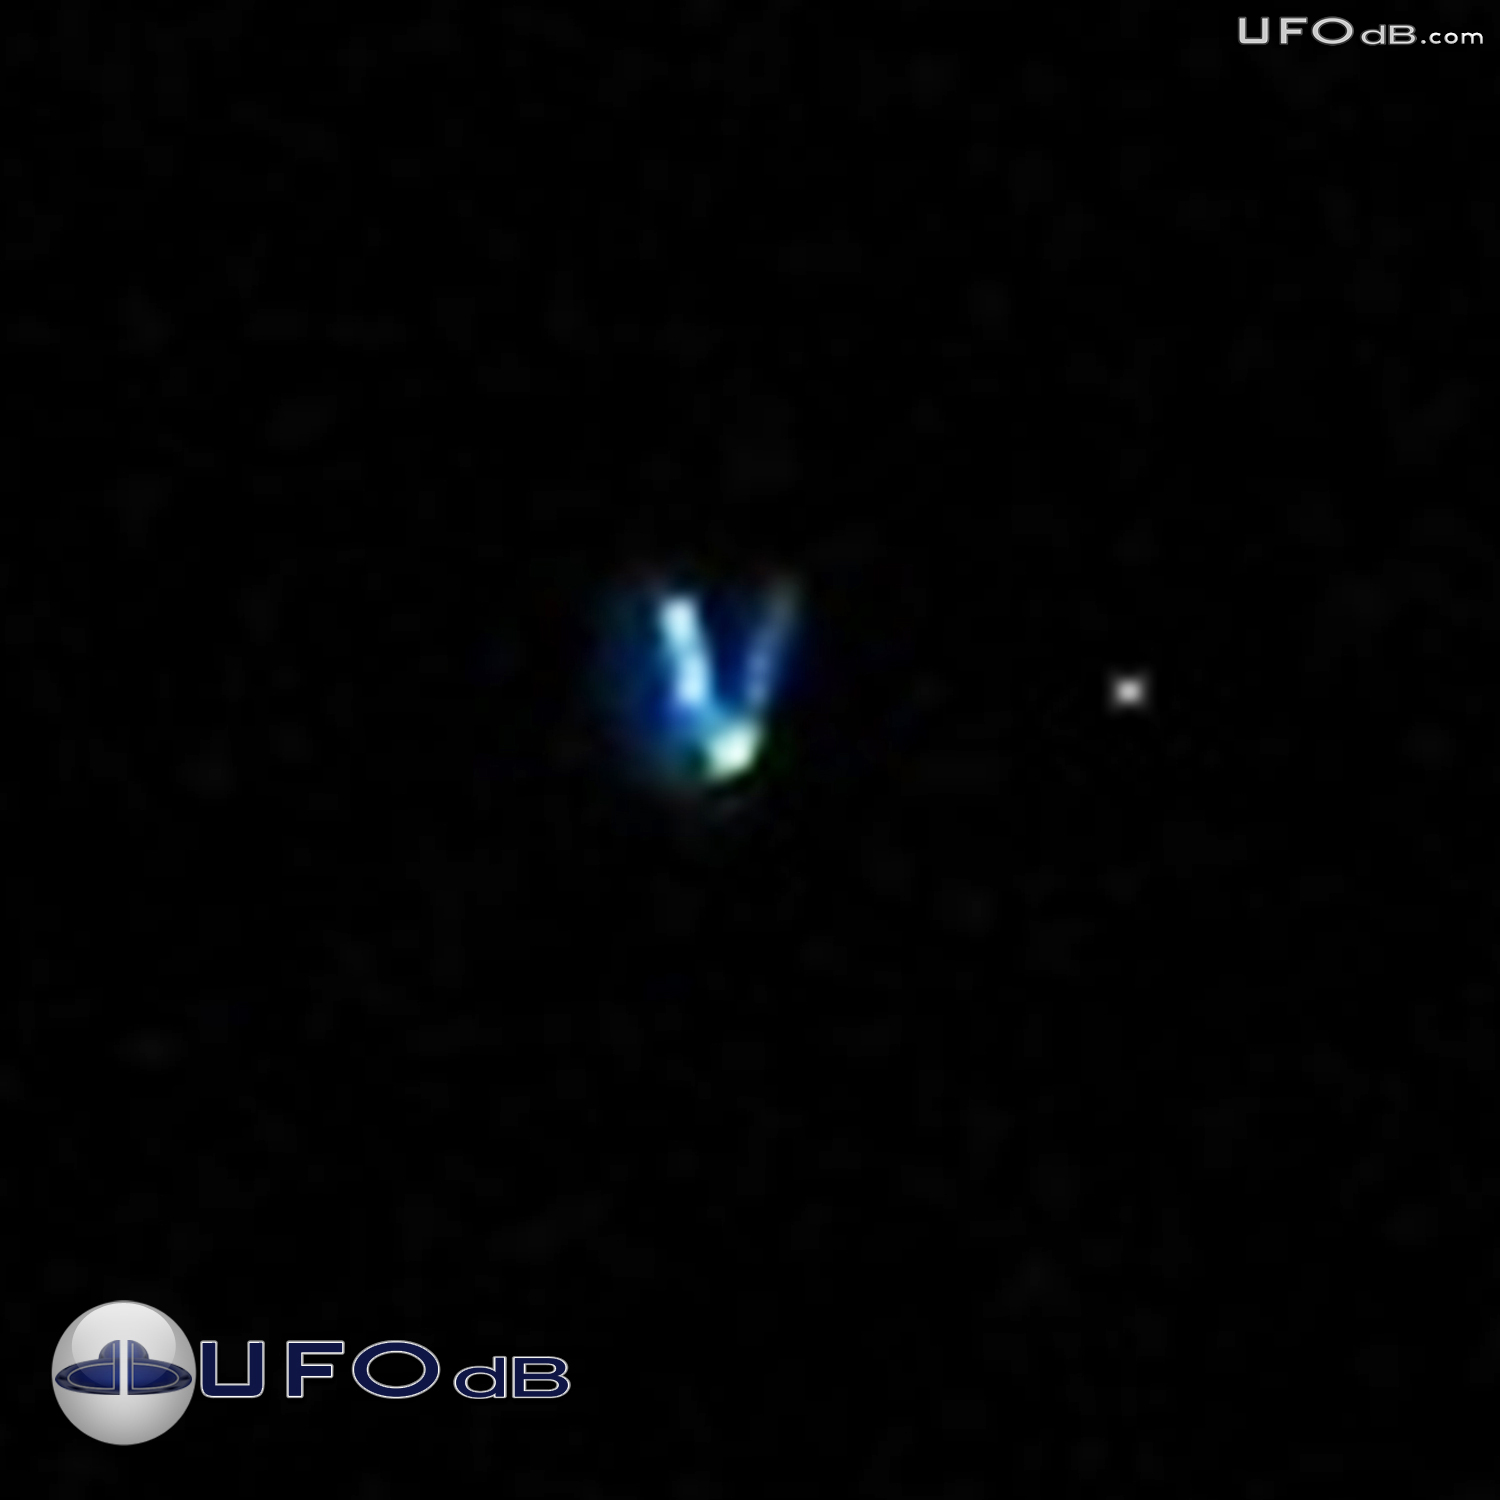 Alien Space Station taken on picture | Alberta Canada | January 2011 UFO Picture #270-1